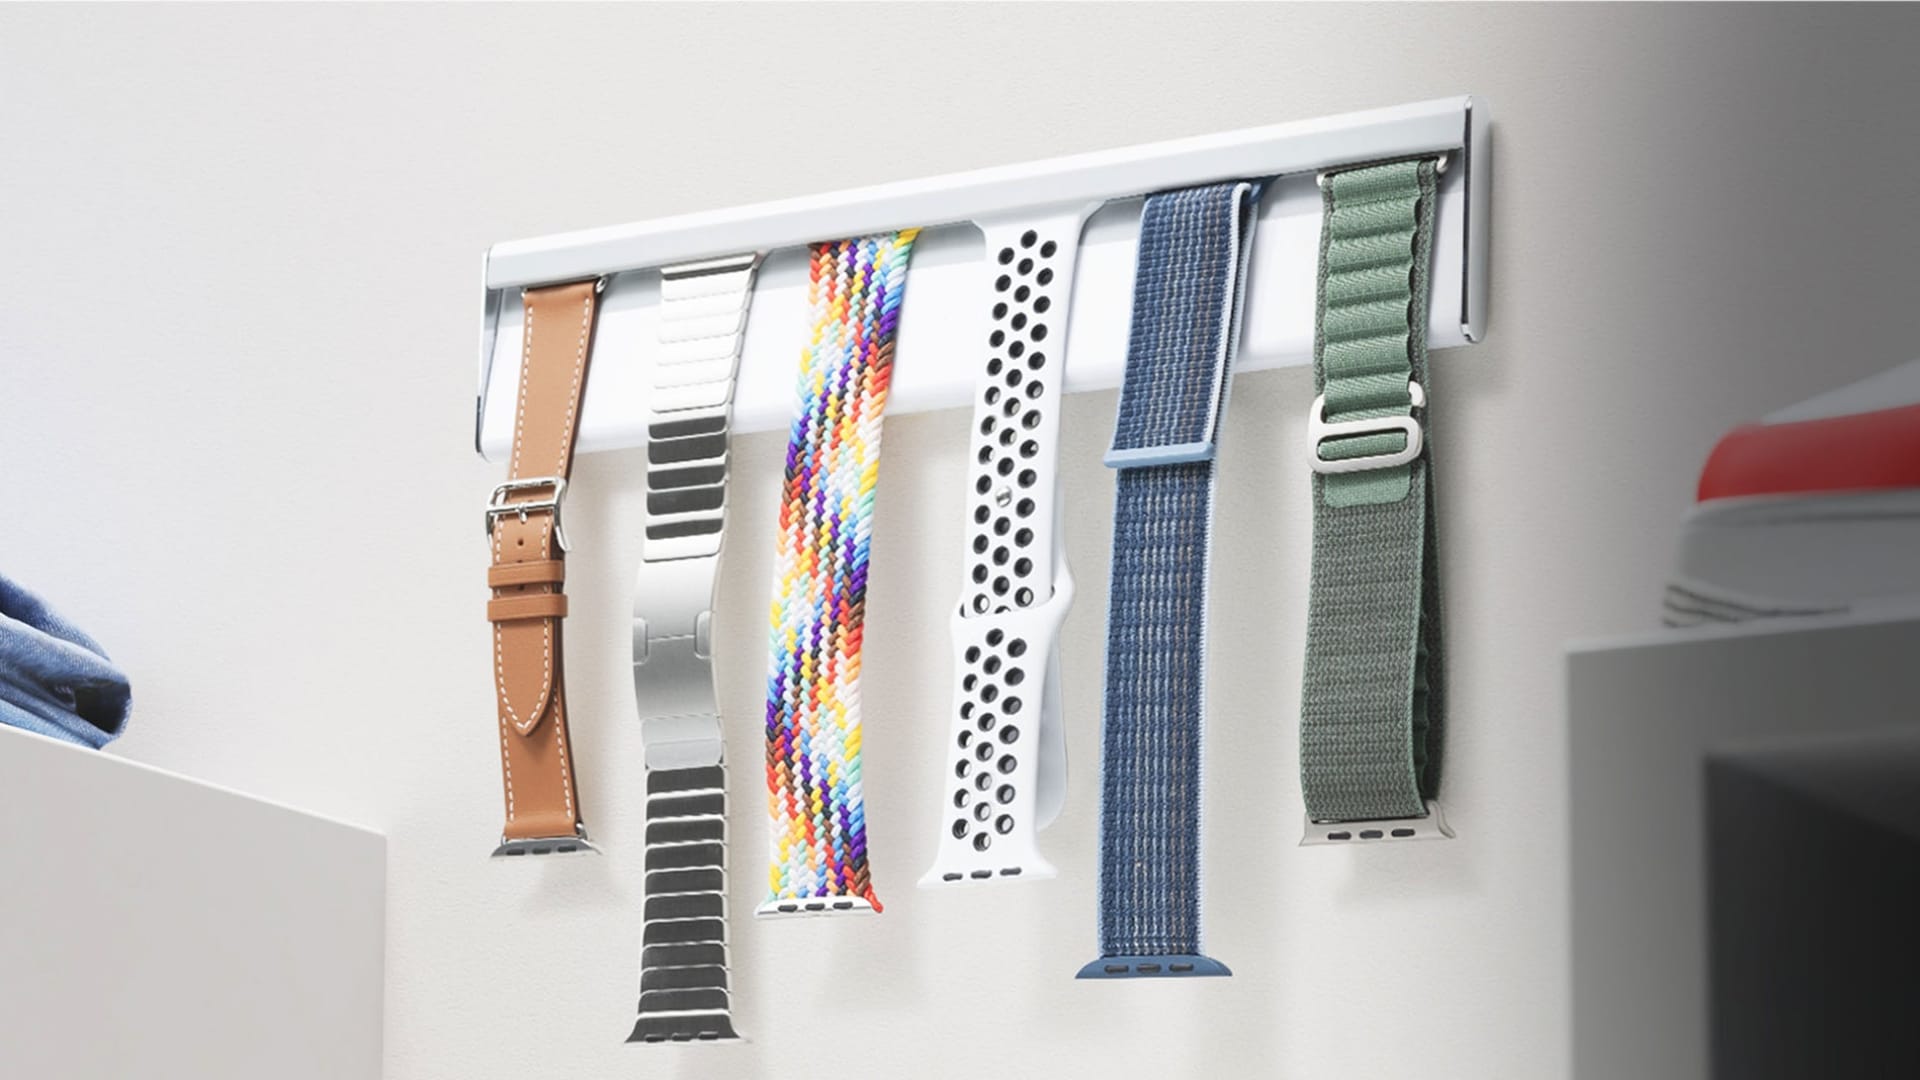 Twelve South’s TimePorter showcases your Apple Watch band collection